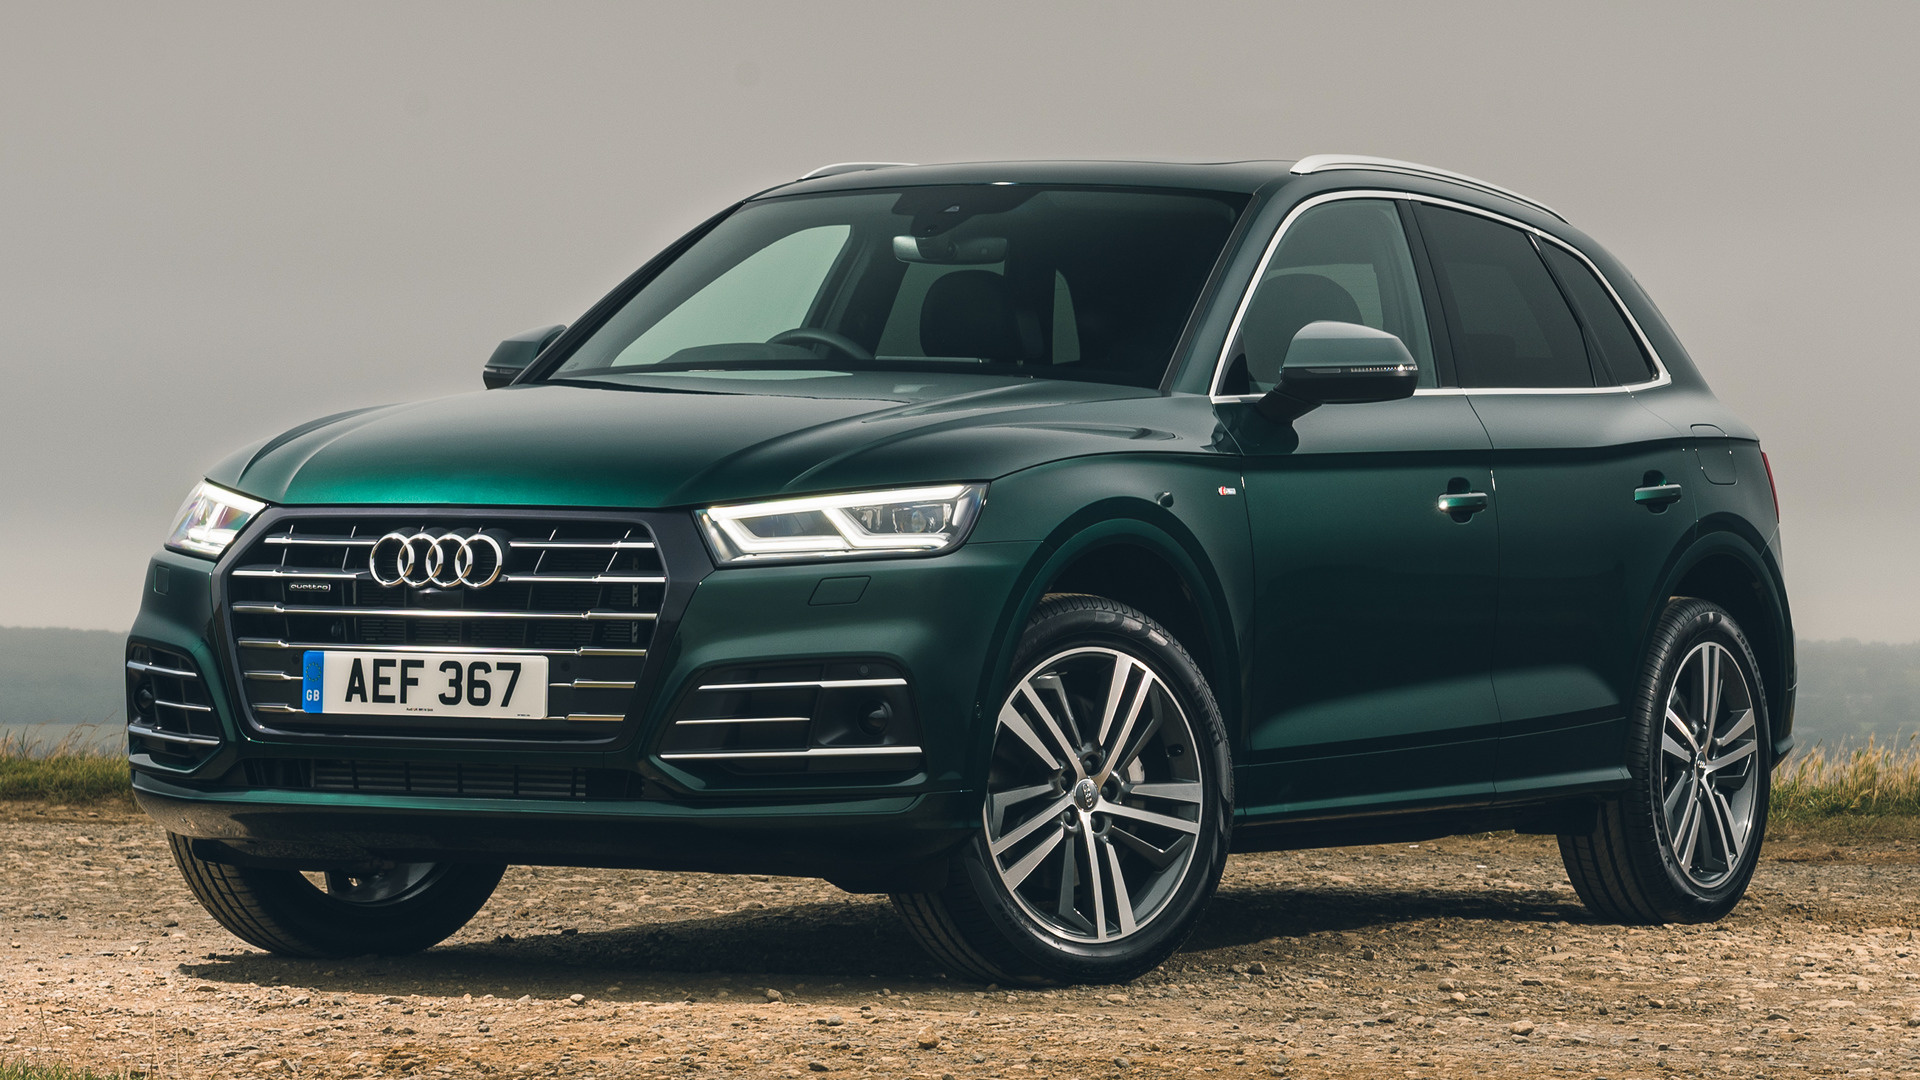 2019 Audi Q5 Plug-In Hybrid S line (UK) - Wallpapers and HD Images